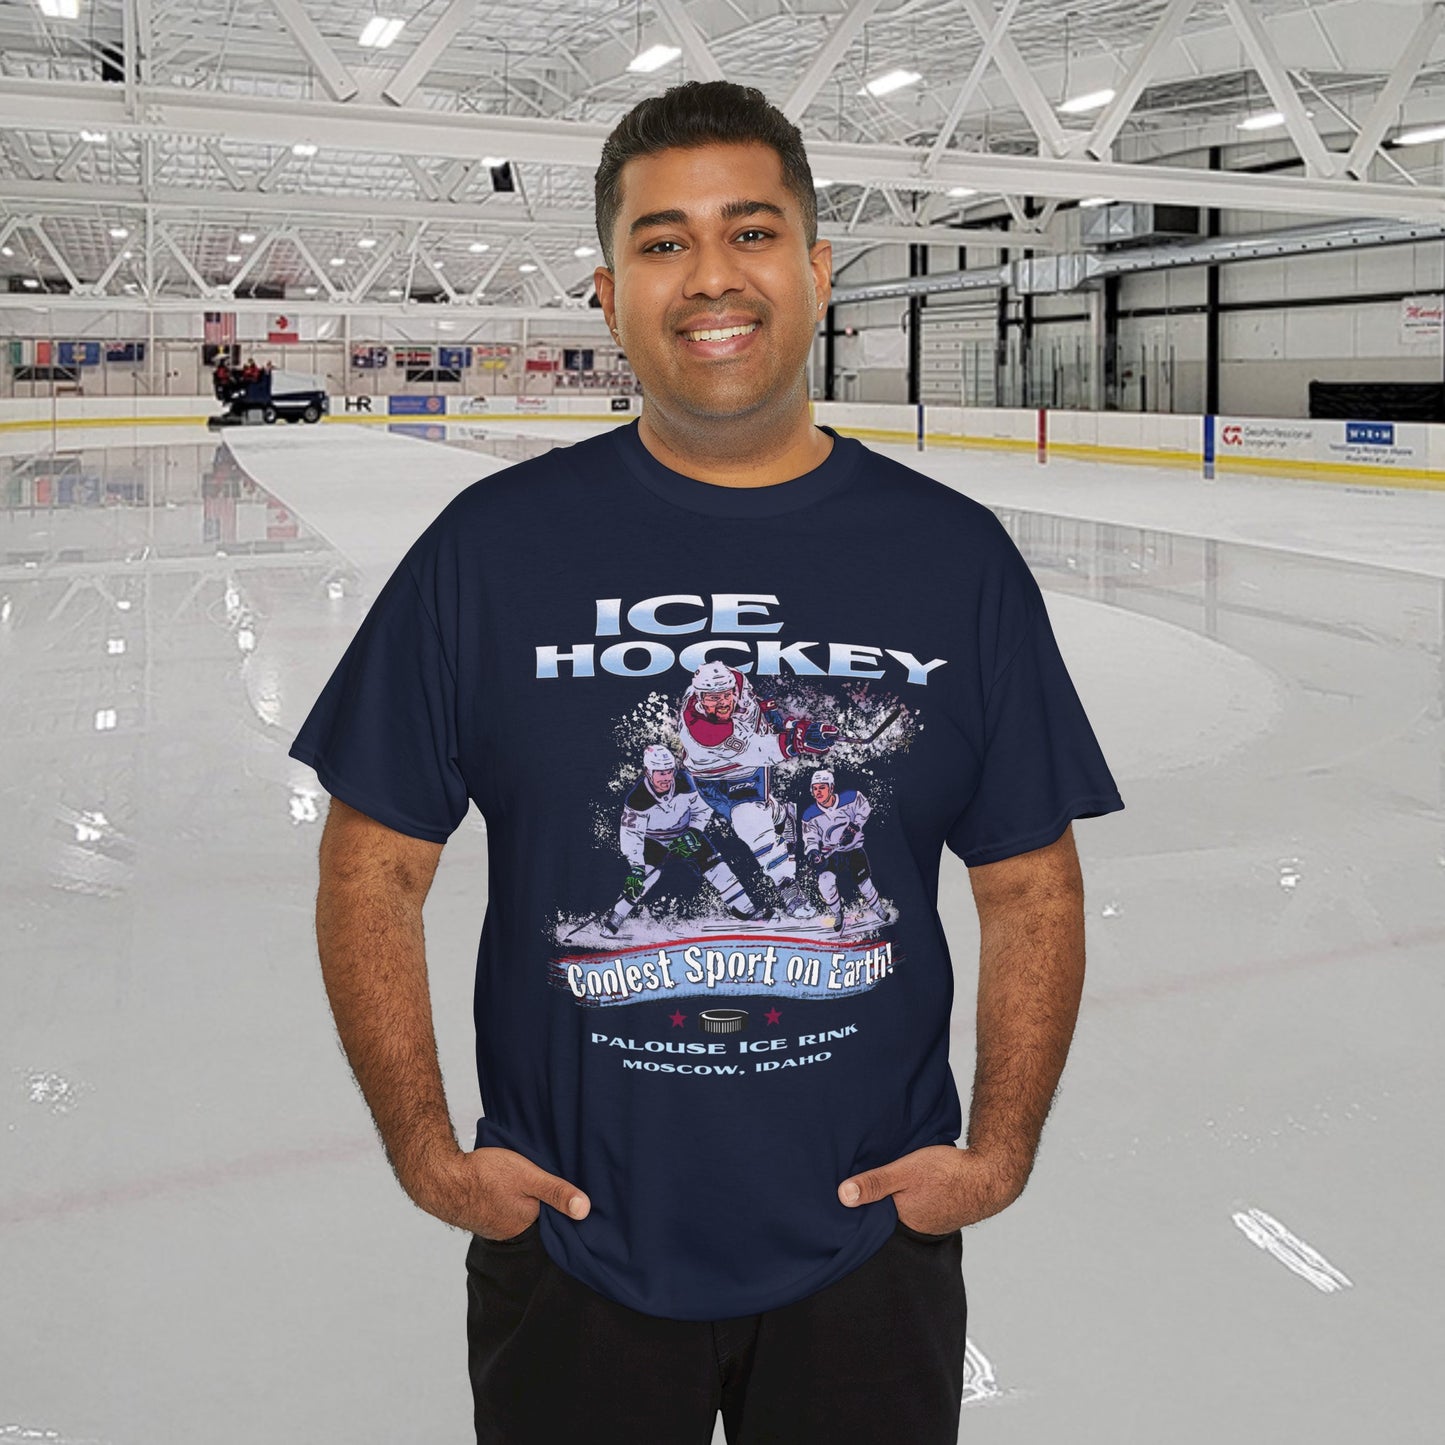 "Ice Hockey, Coolest Sport on Earth" T-shirts